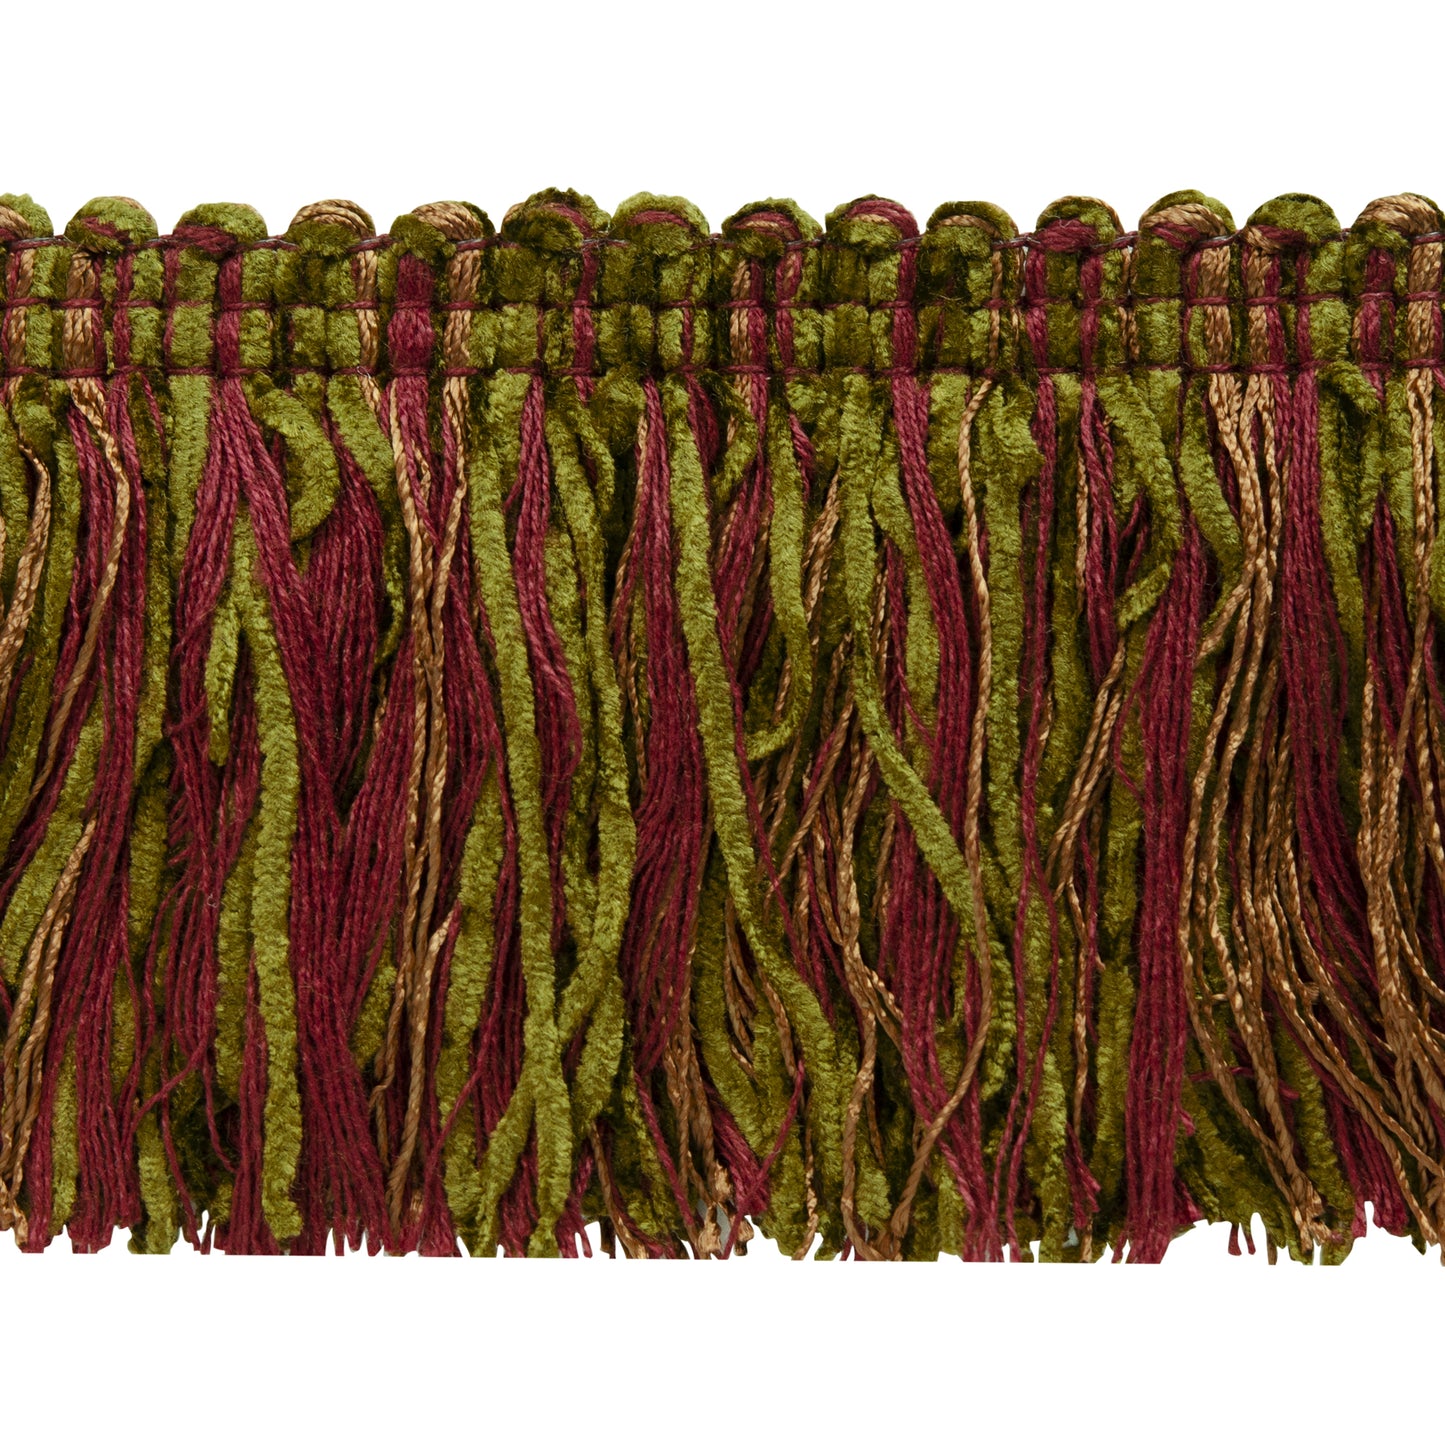 Conso Brush Cut Fringe Trim (Sold by the Yard)